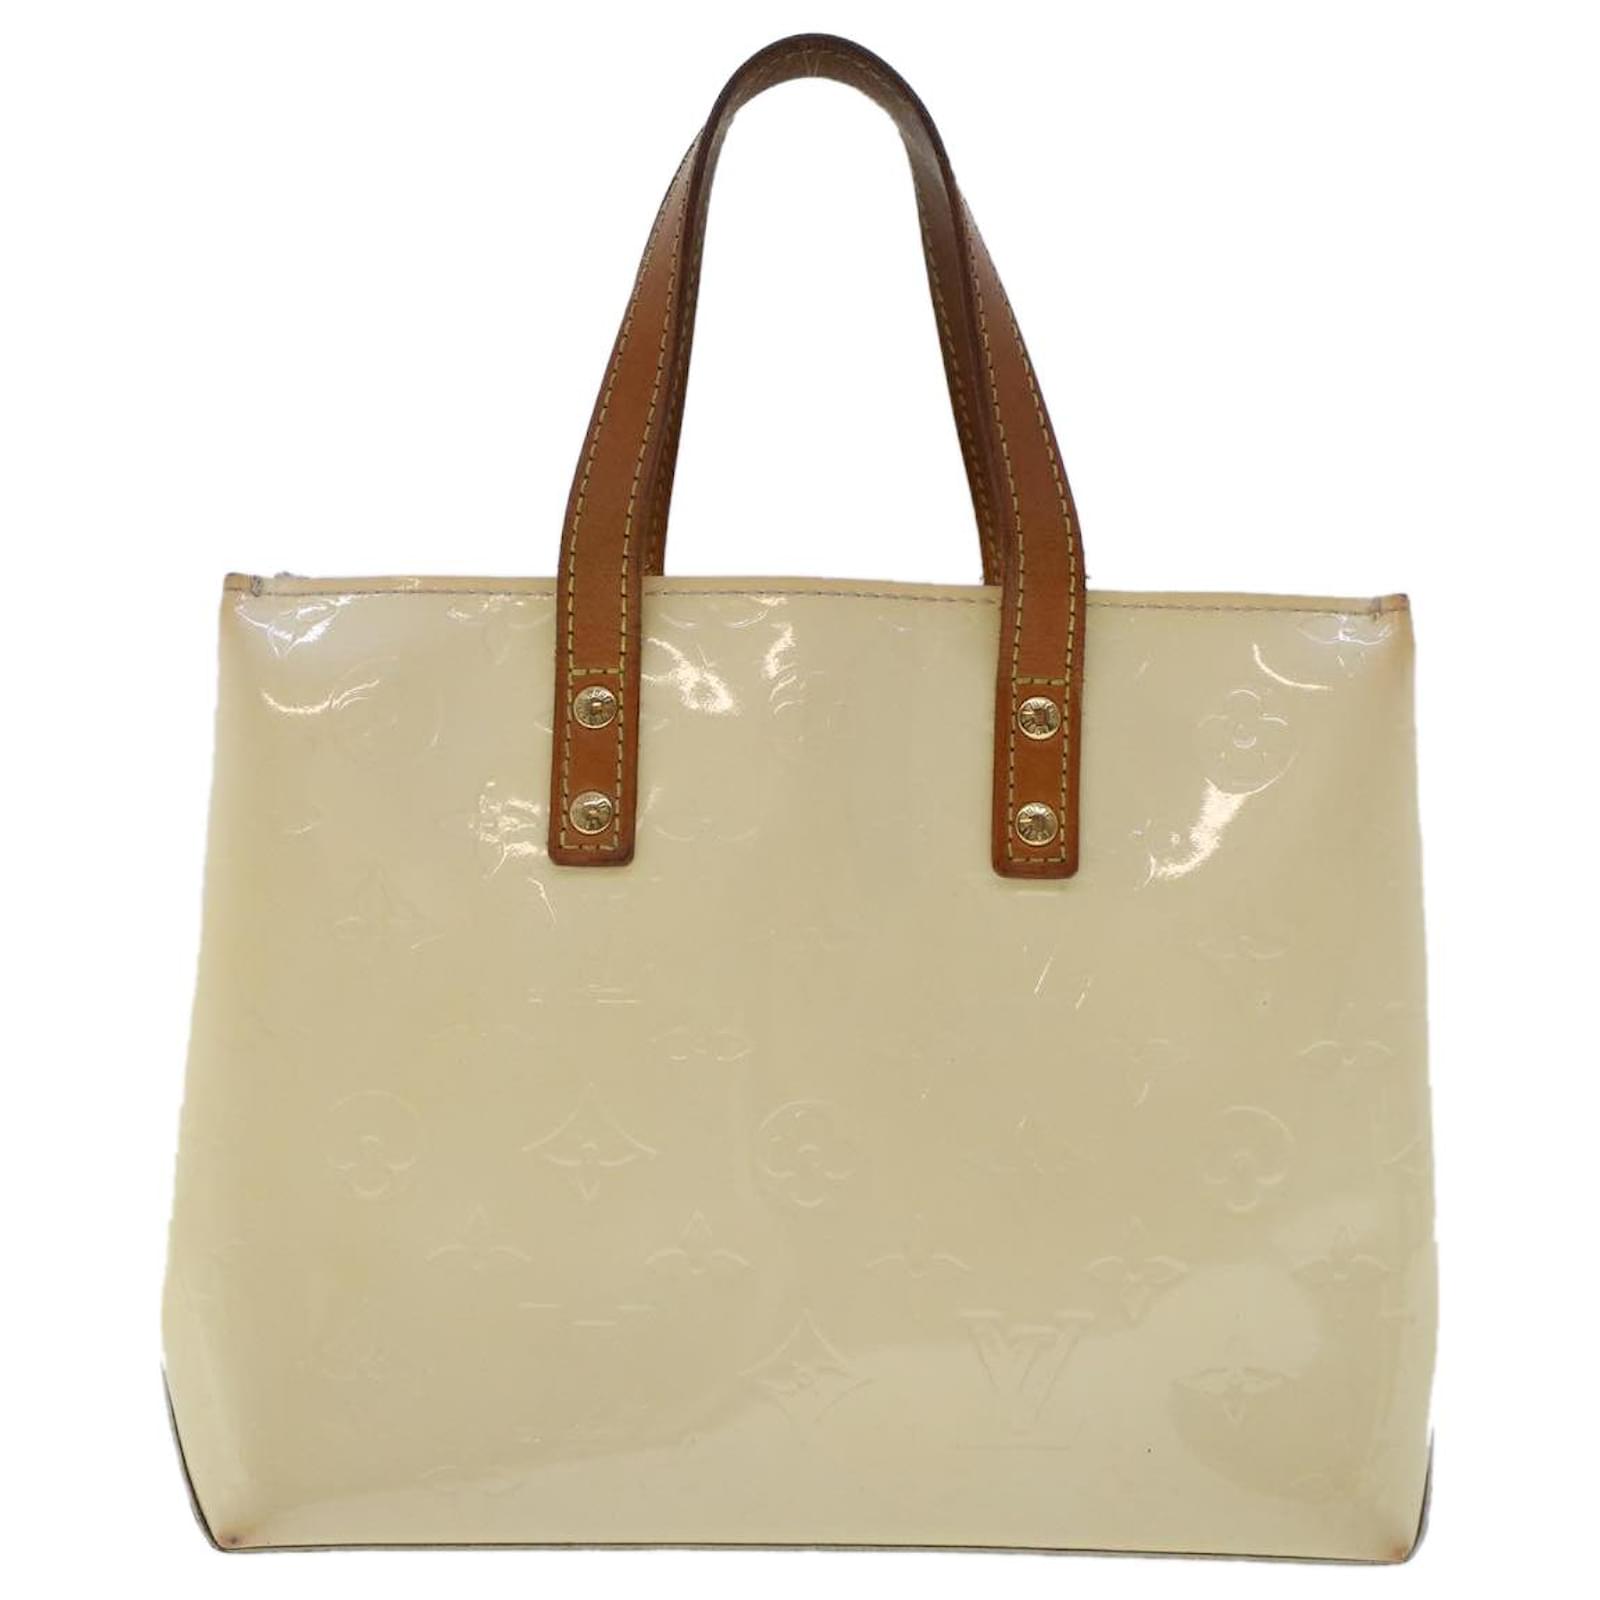 Louis Vuitton Reade handbag in beige monogram patent leather and natural  leather